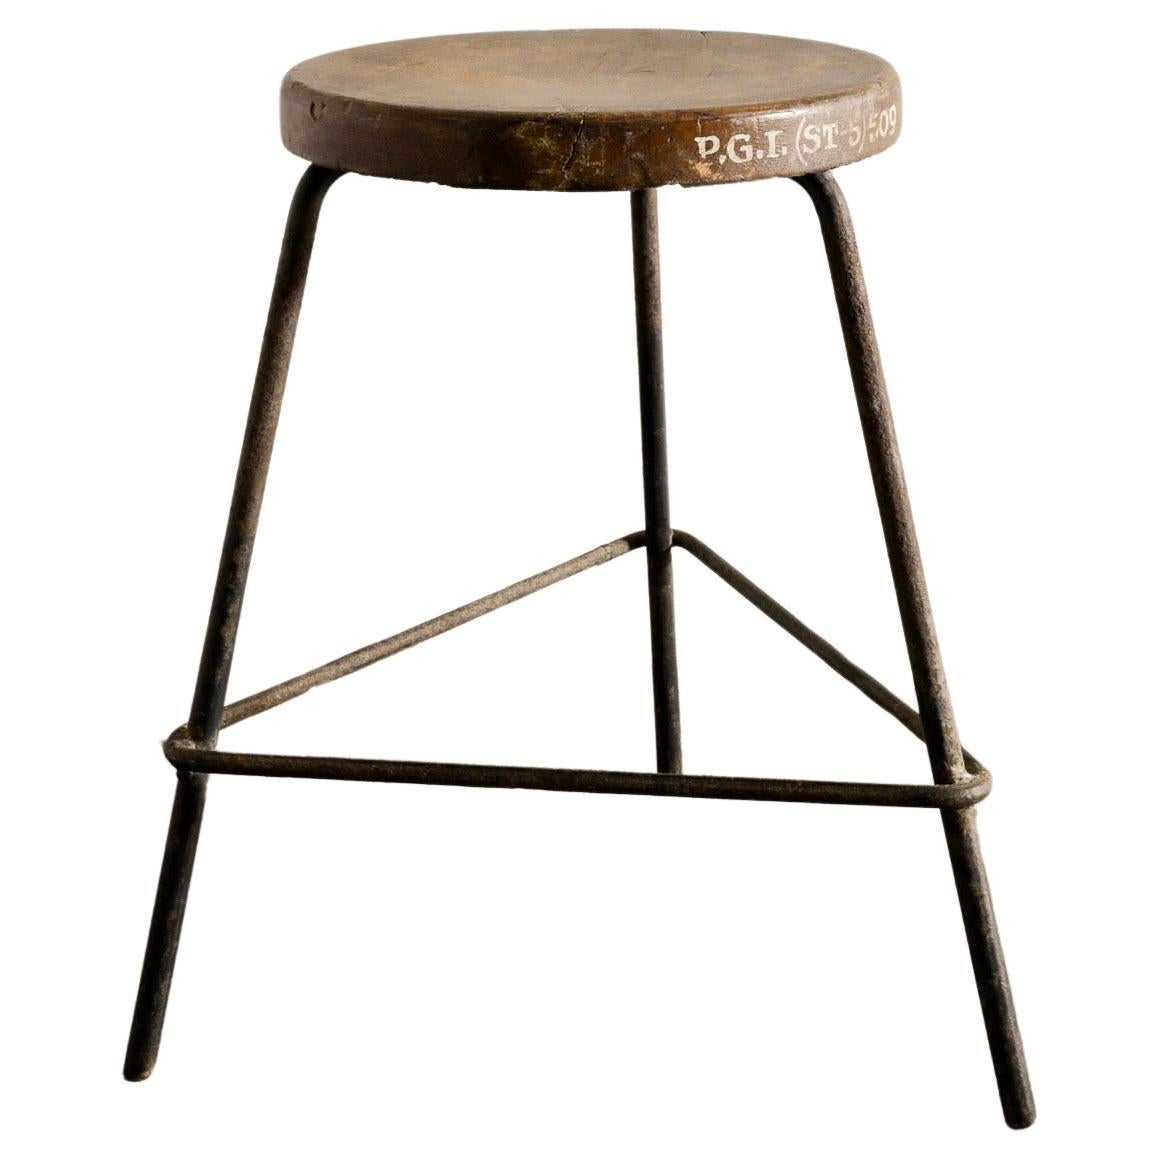 Mid Century Pierre Jeanneret Stool in Teak & Iron Produced for Chandigarh, 1950s For Sale